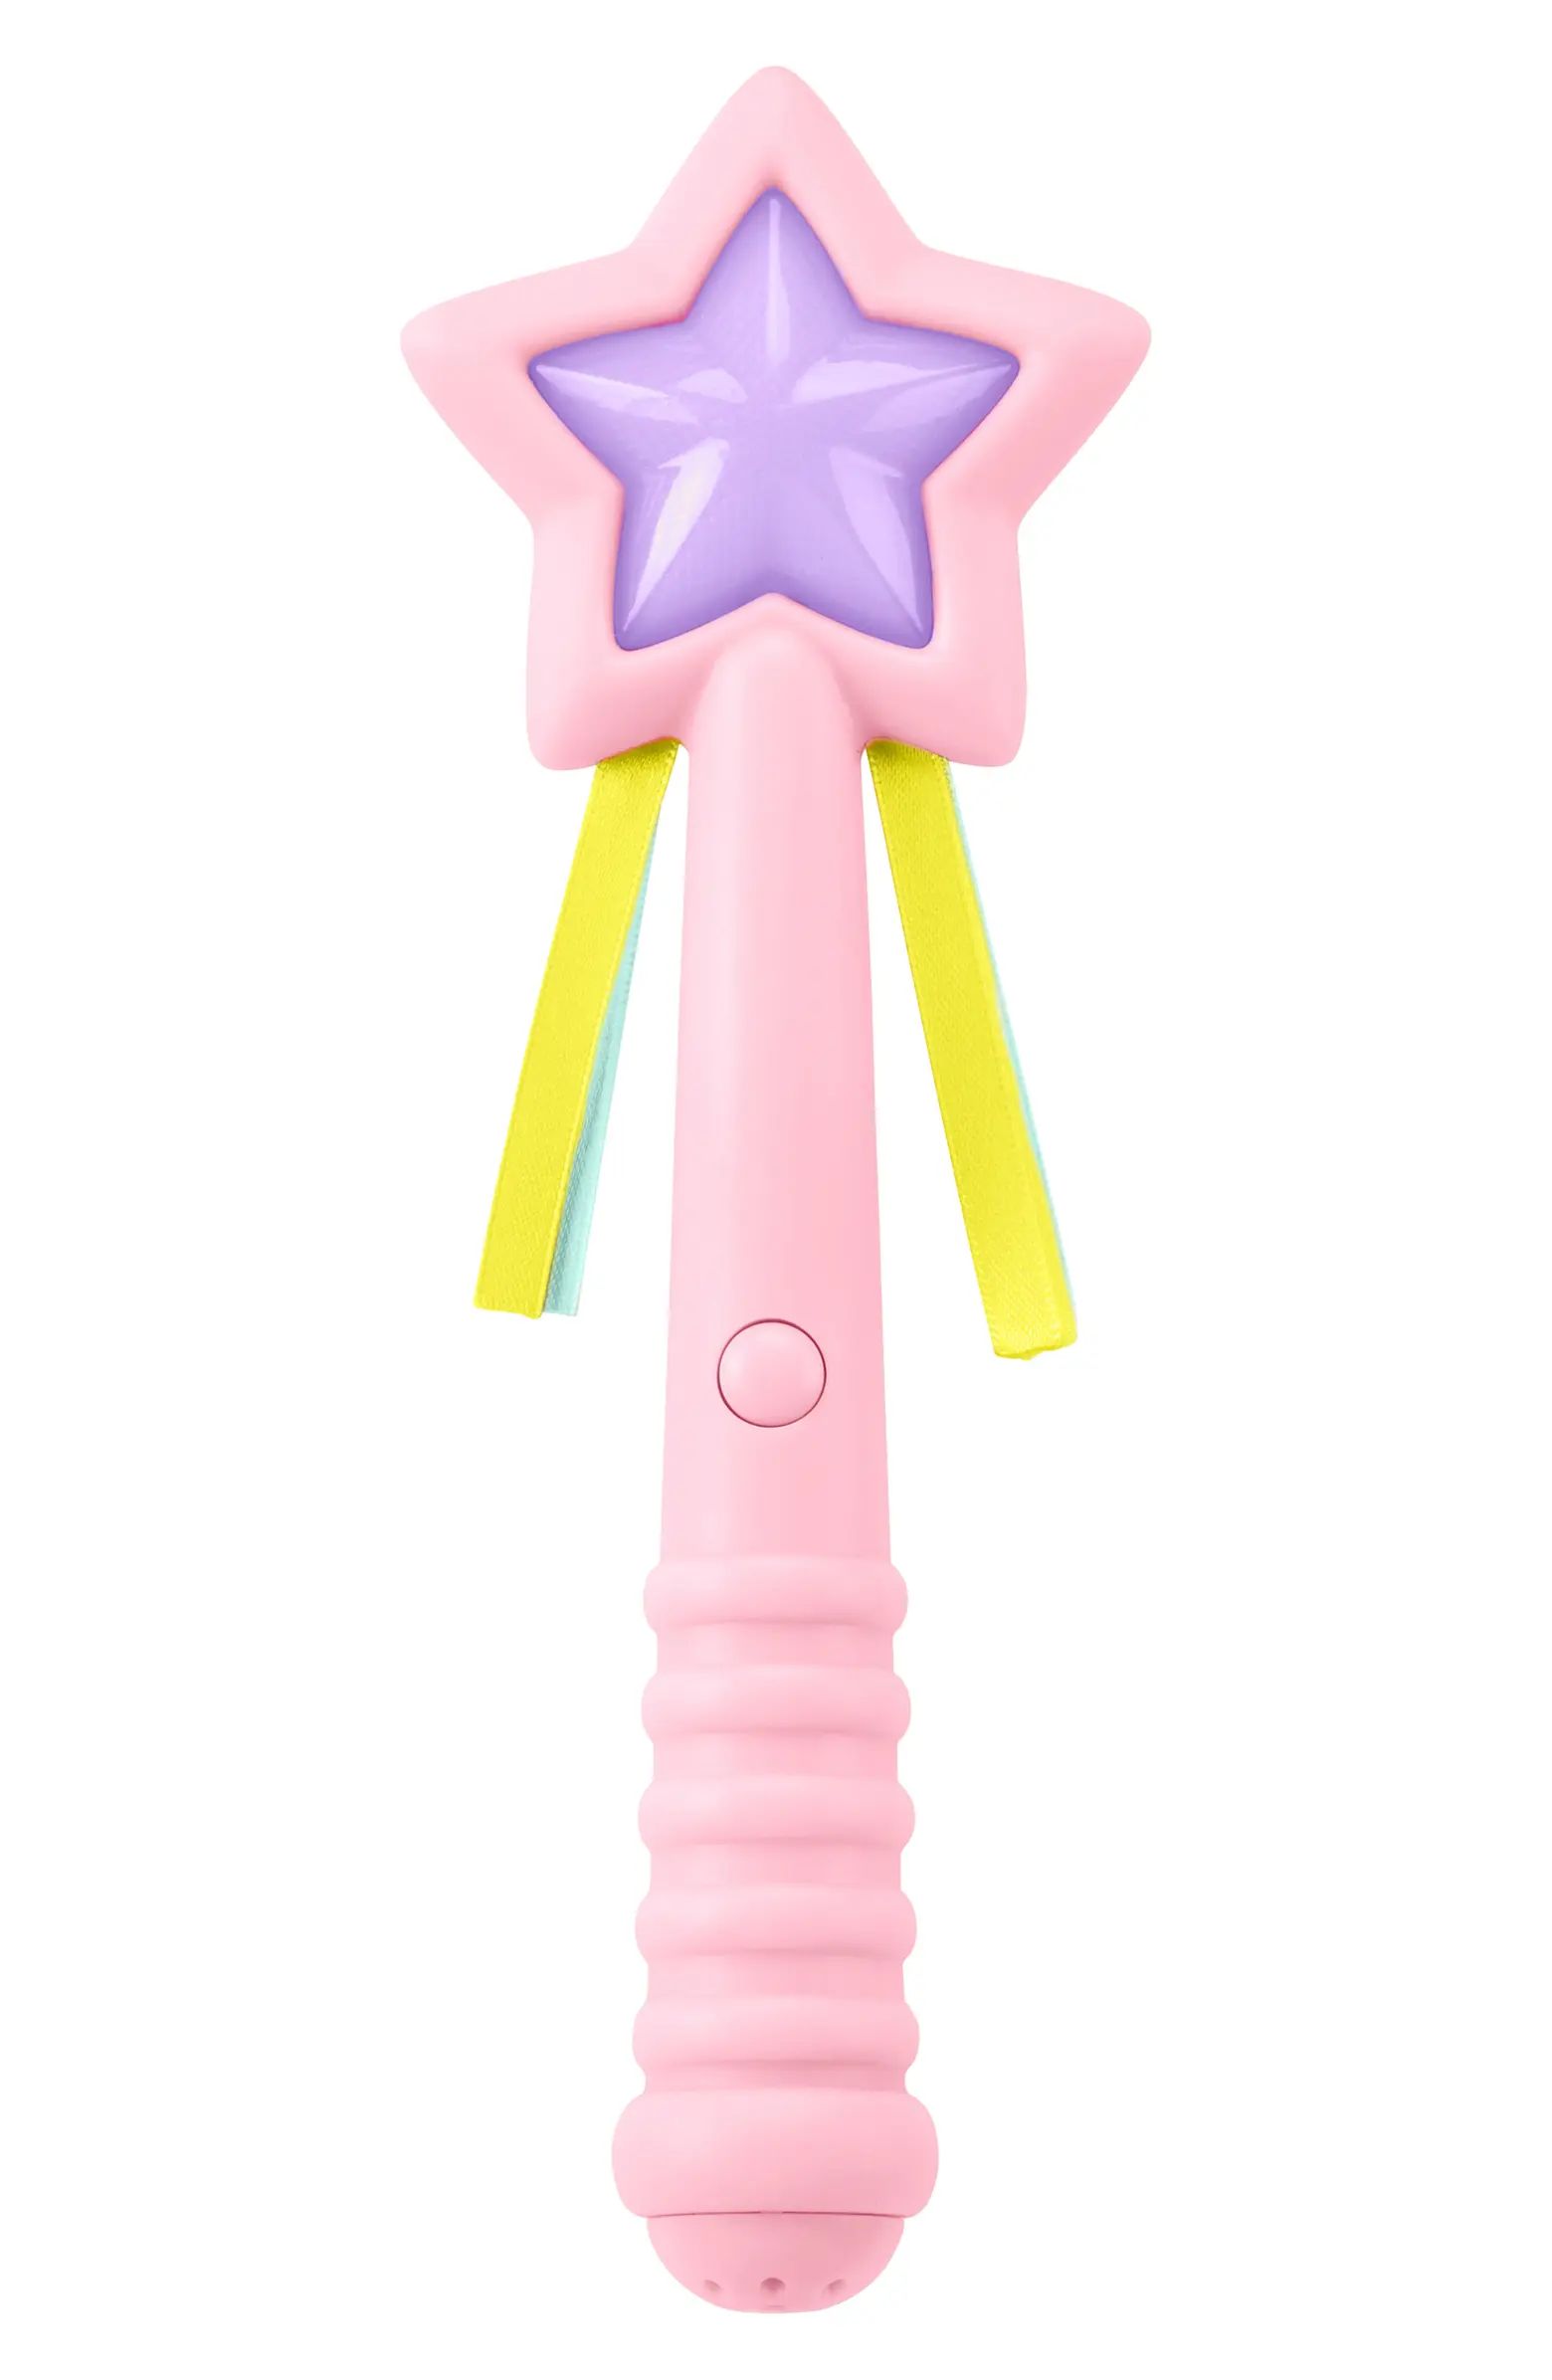 Magic Wand Toy | Nordstrom